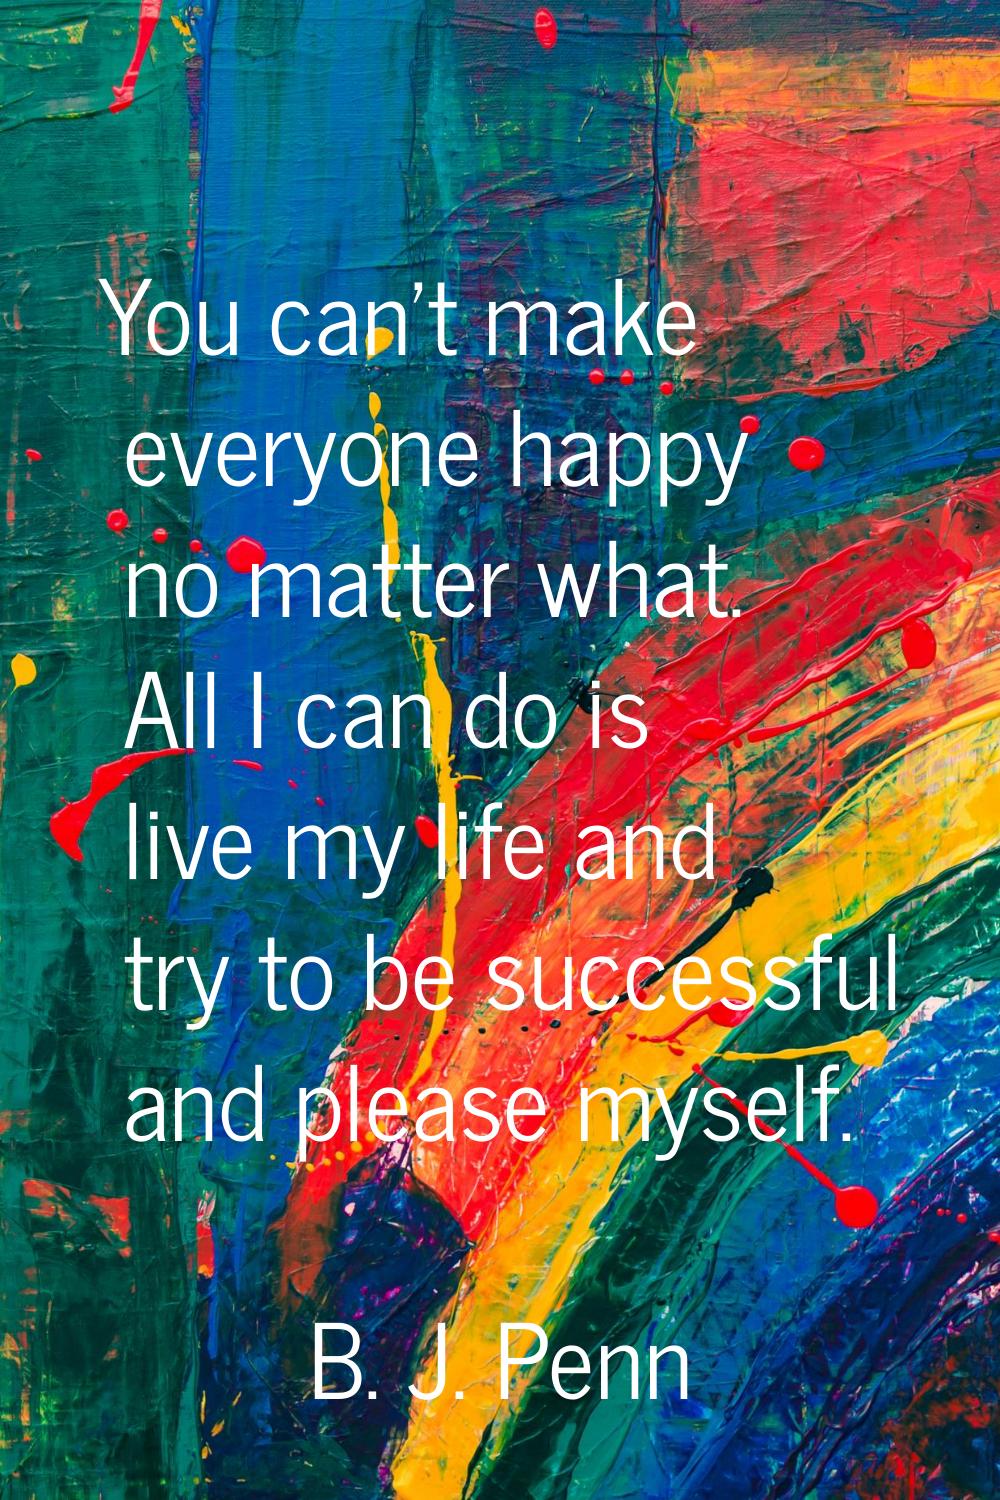 You can't make everyone happy no matter what. All I can do is live my life and try to be successful